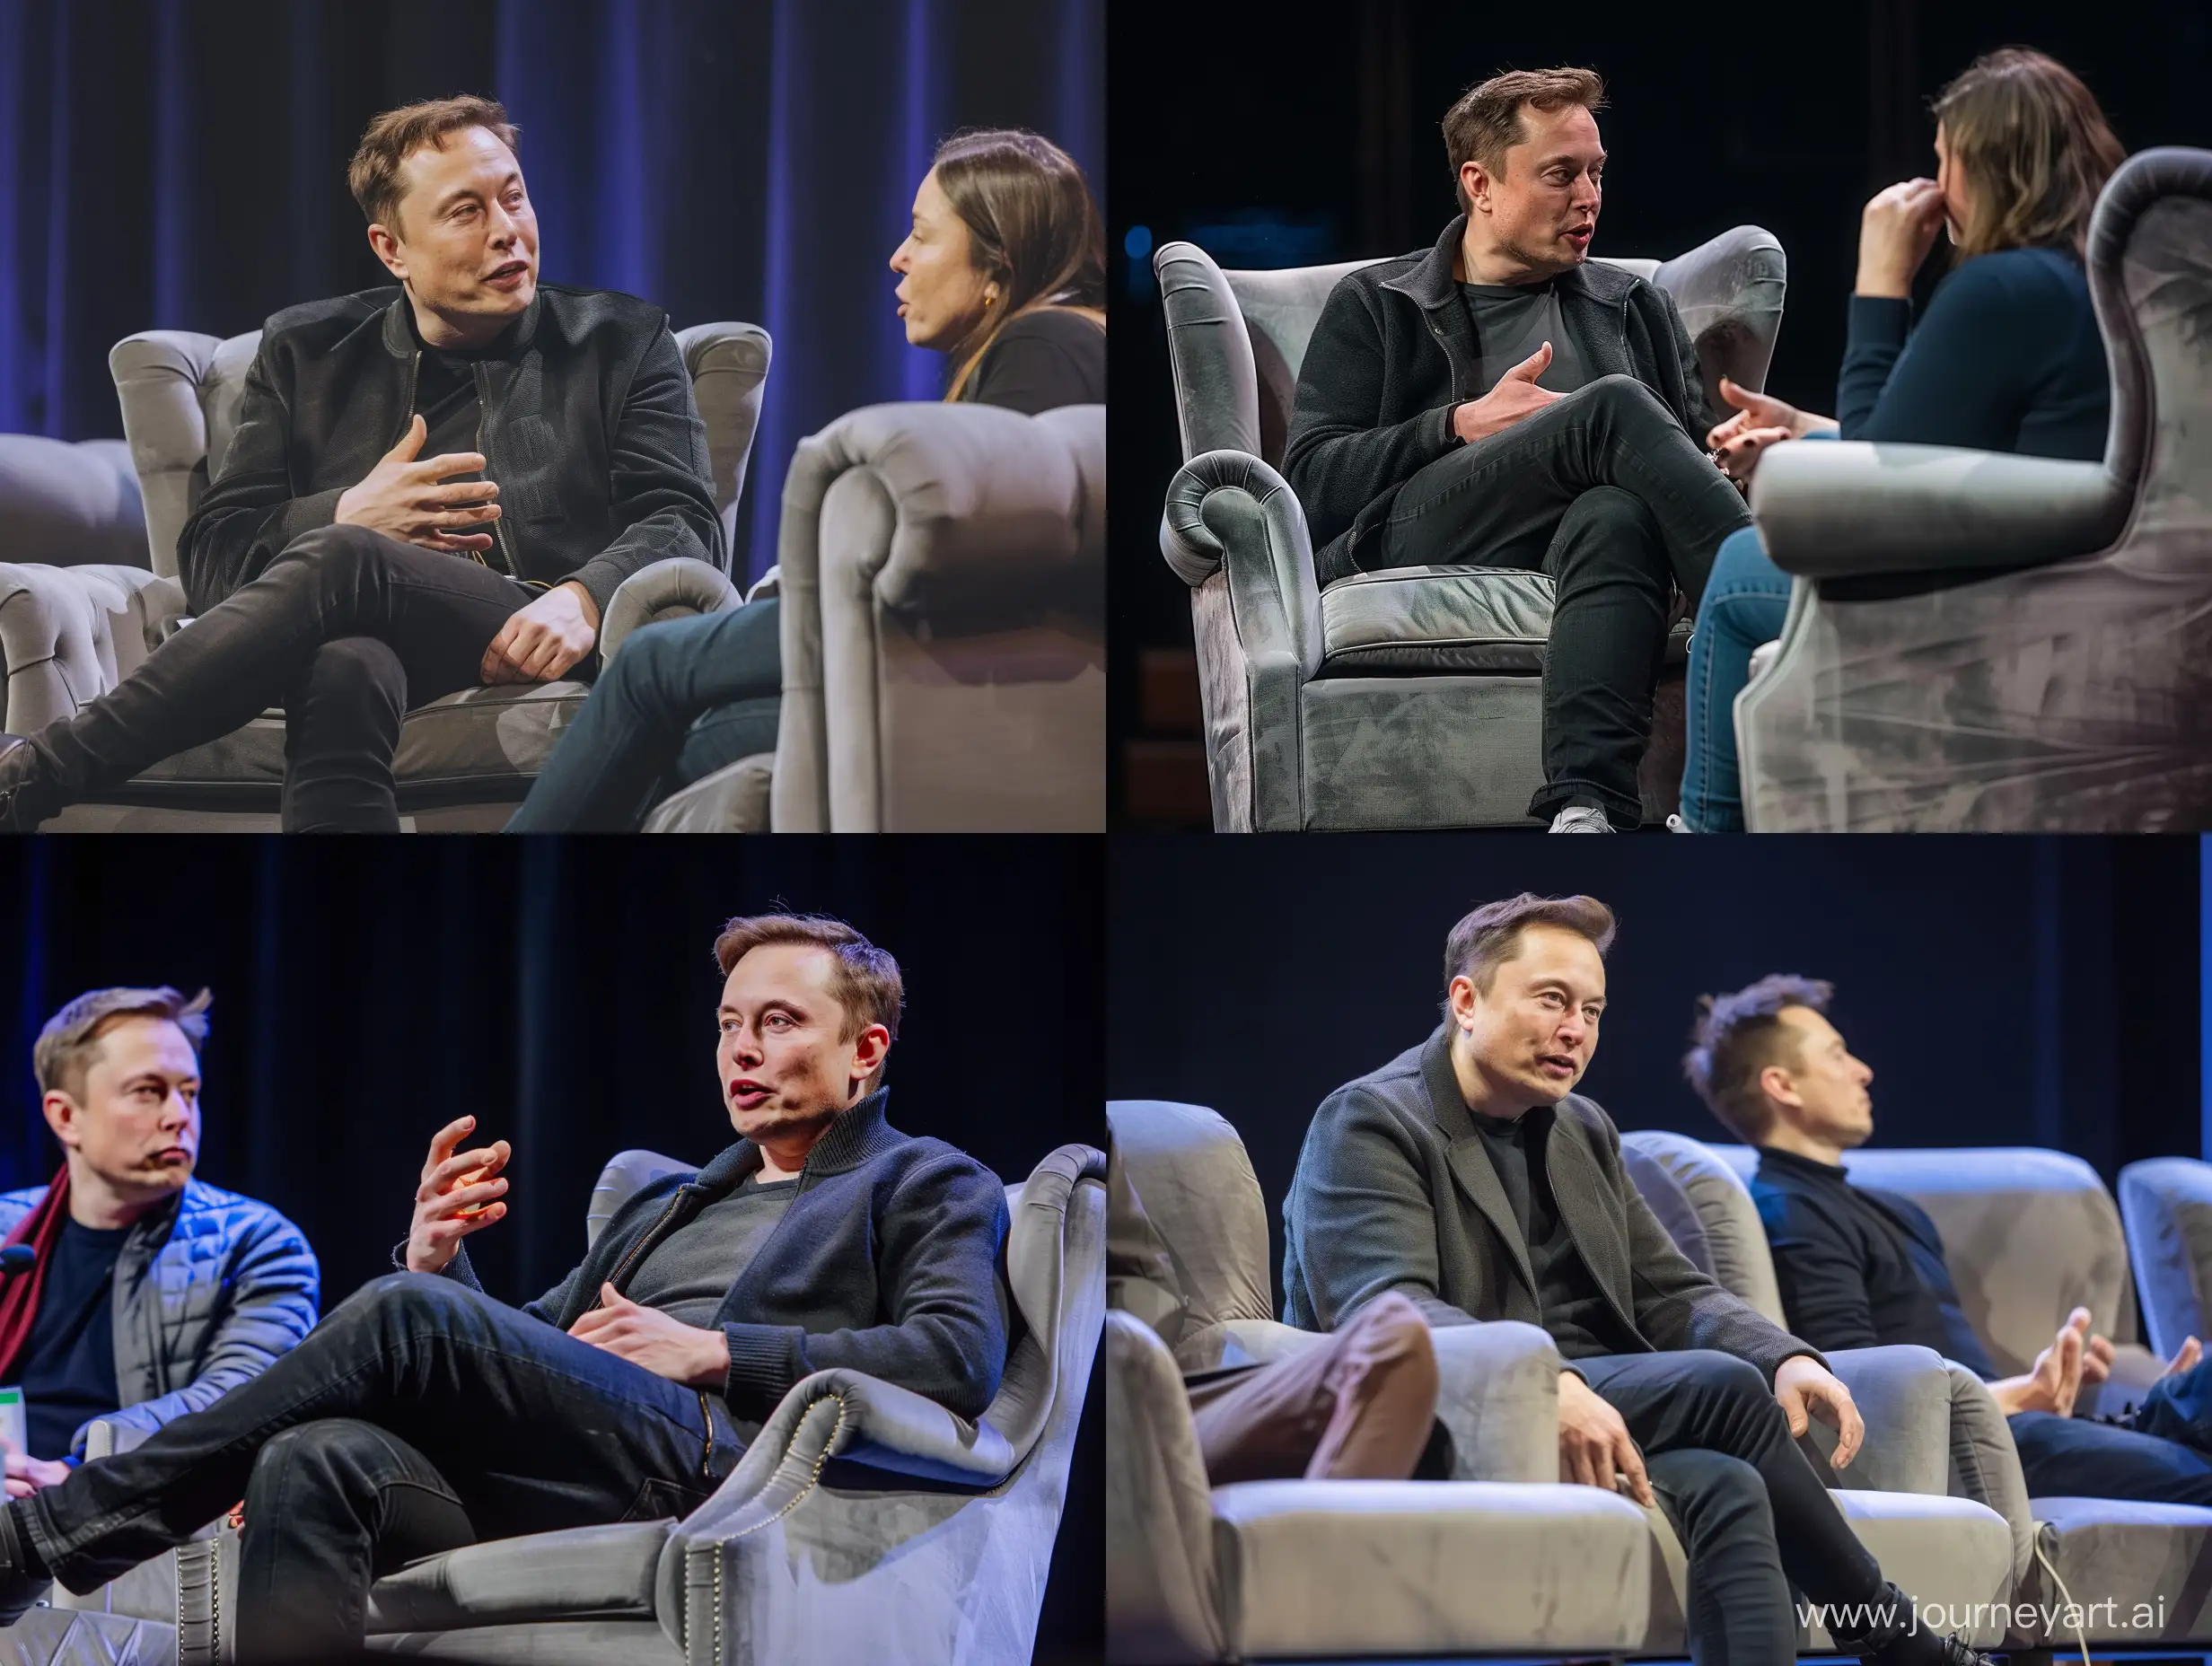 A cinematic closeup photo of Elon Musk on a stage sitting on a grey plush armchair talking to another person, also on a similar chair